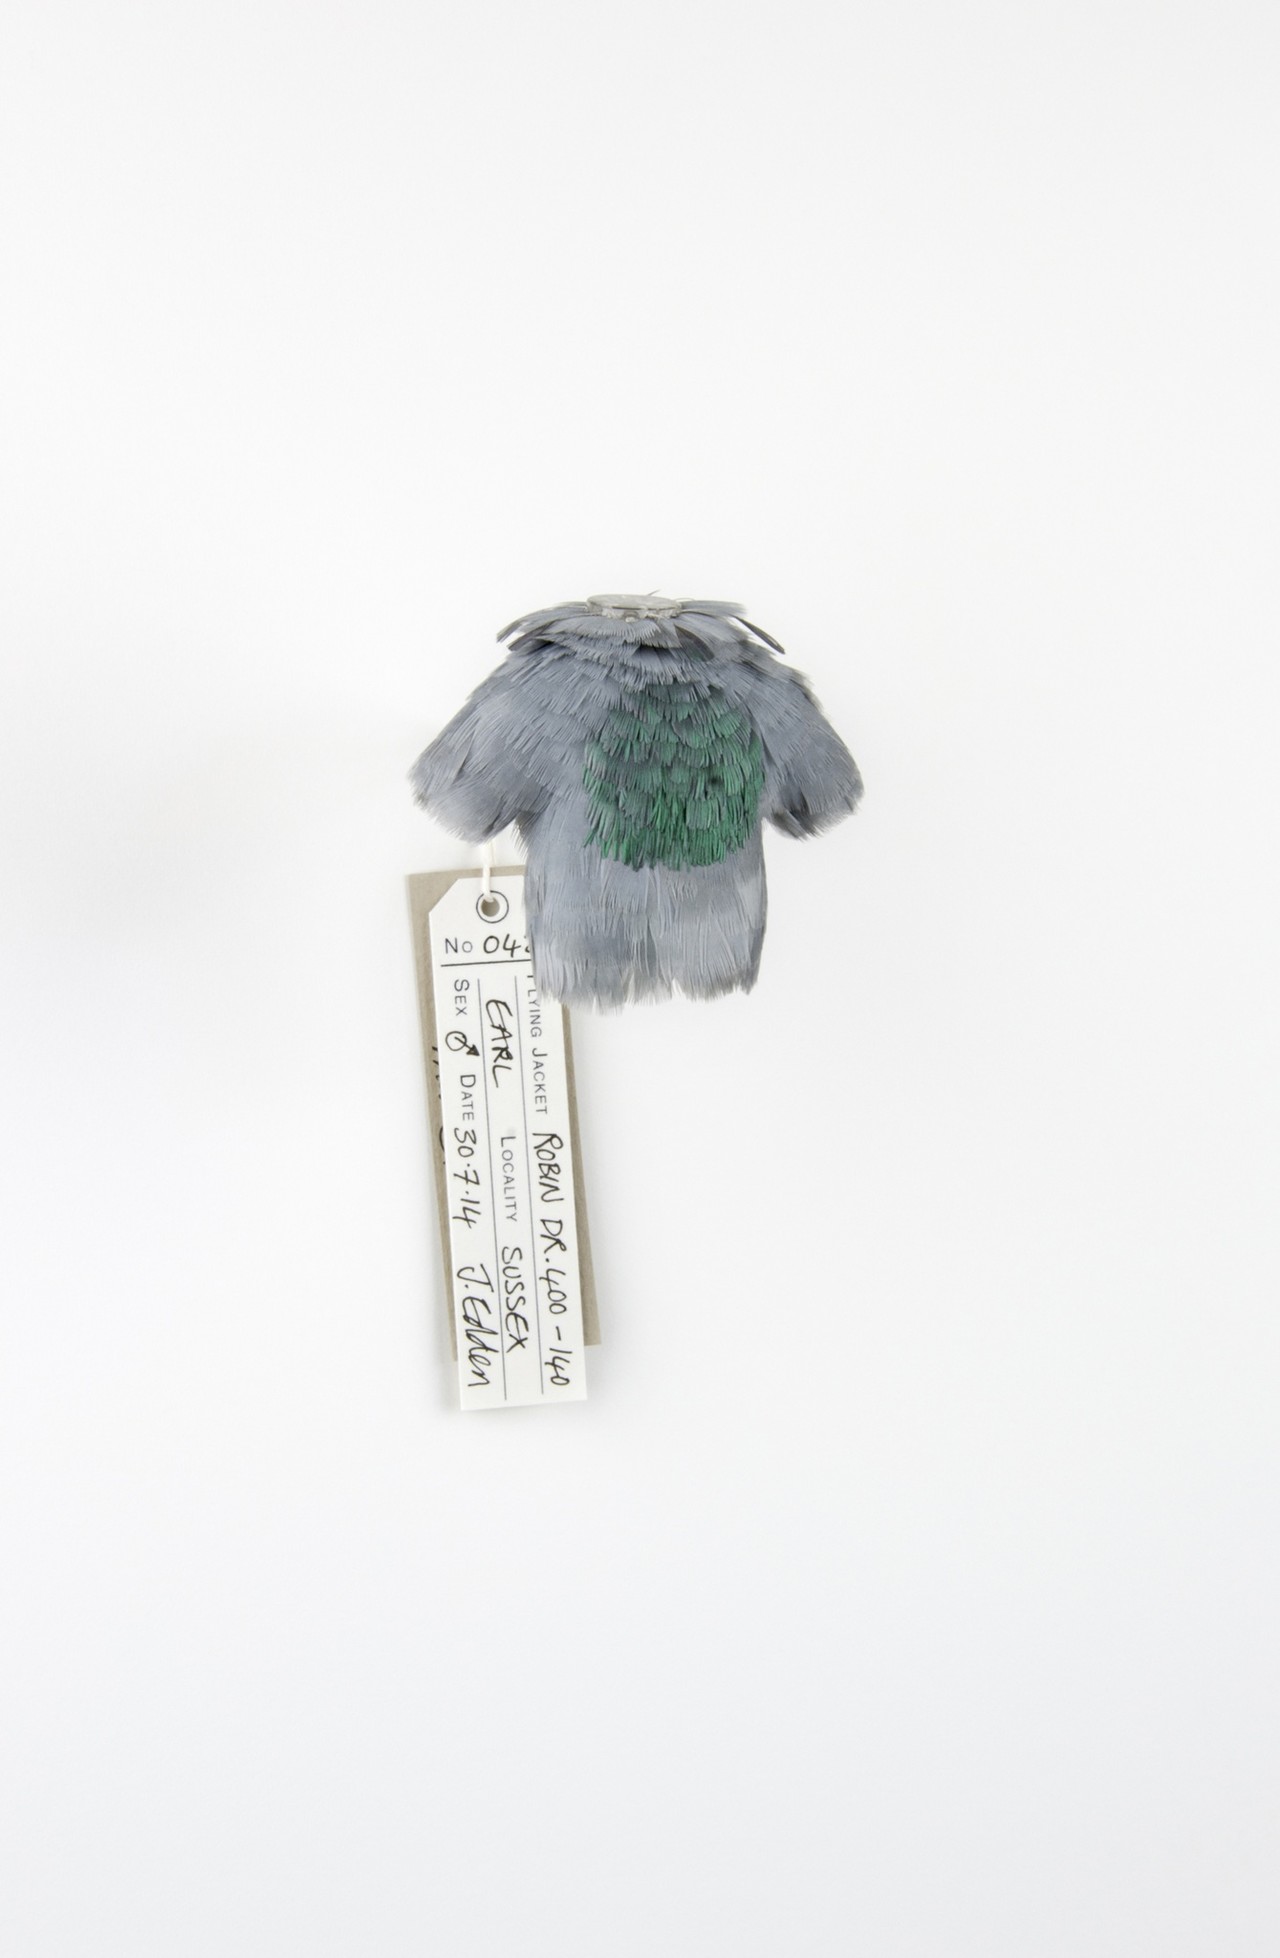 Jane Edden, Robin DR 400-140 Earl, 2014, Resin and pigeon feathers in perspex case, 15 x 15 x 10 cm, JE 001